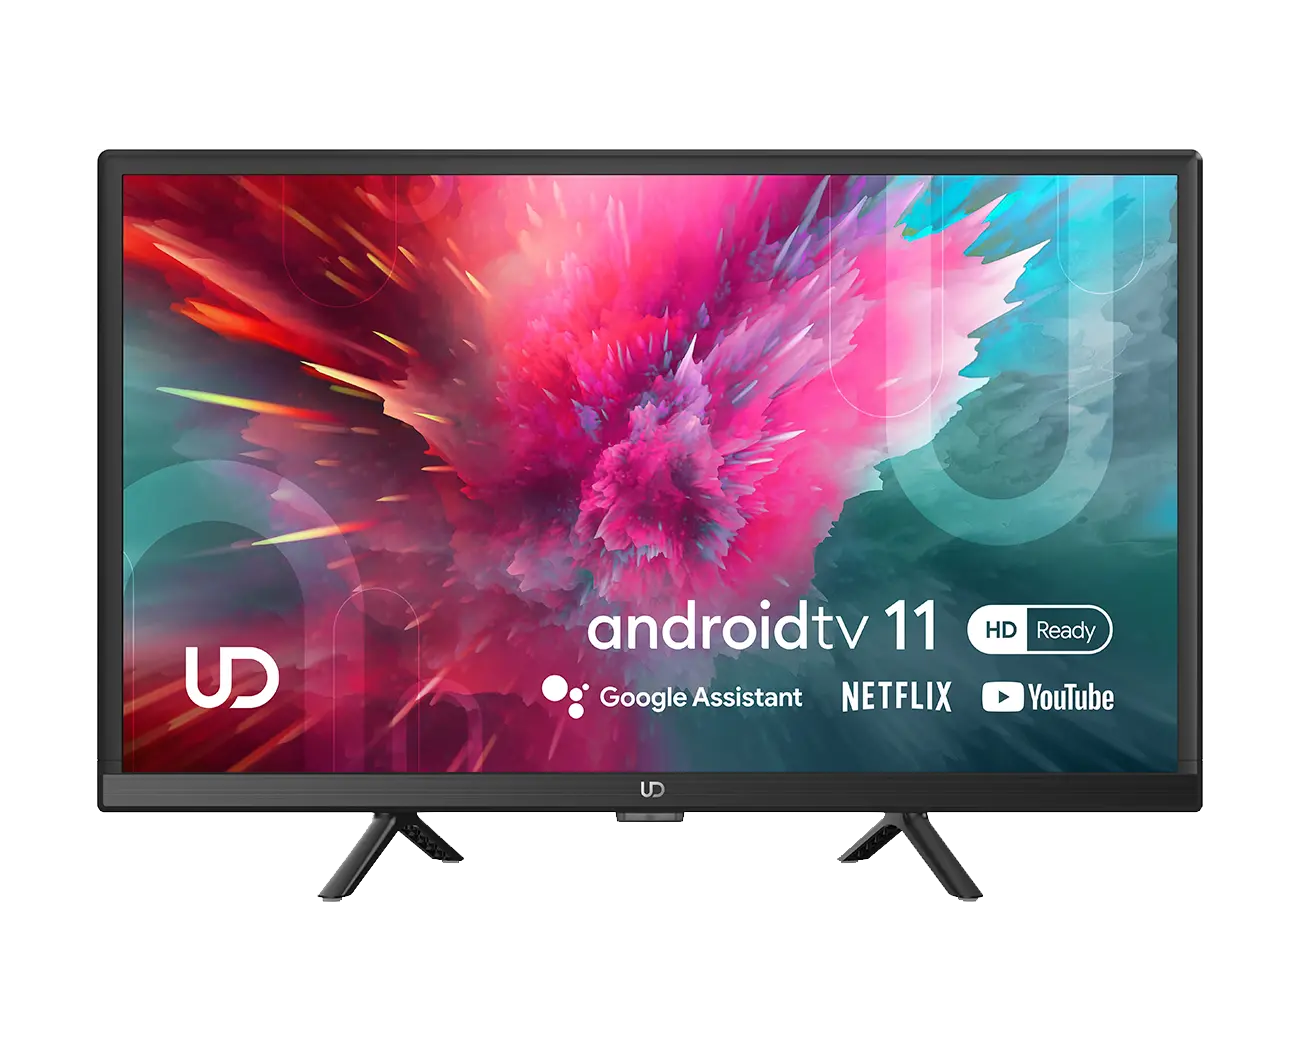 HD Android Smart TV UD 24W5210